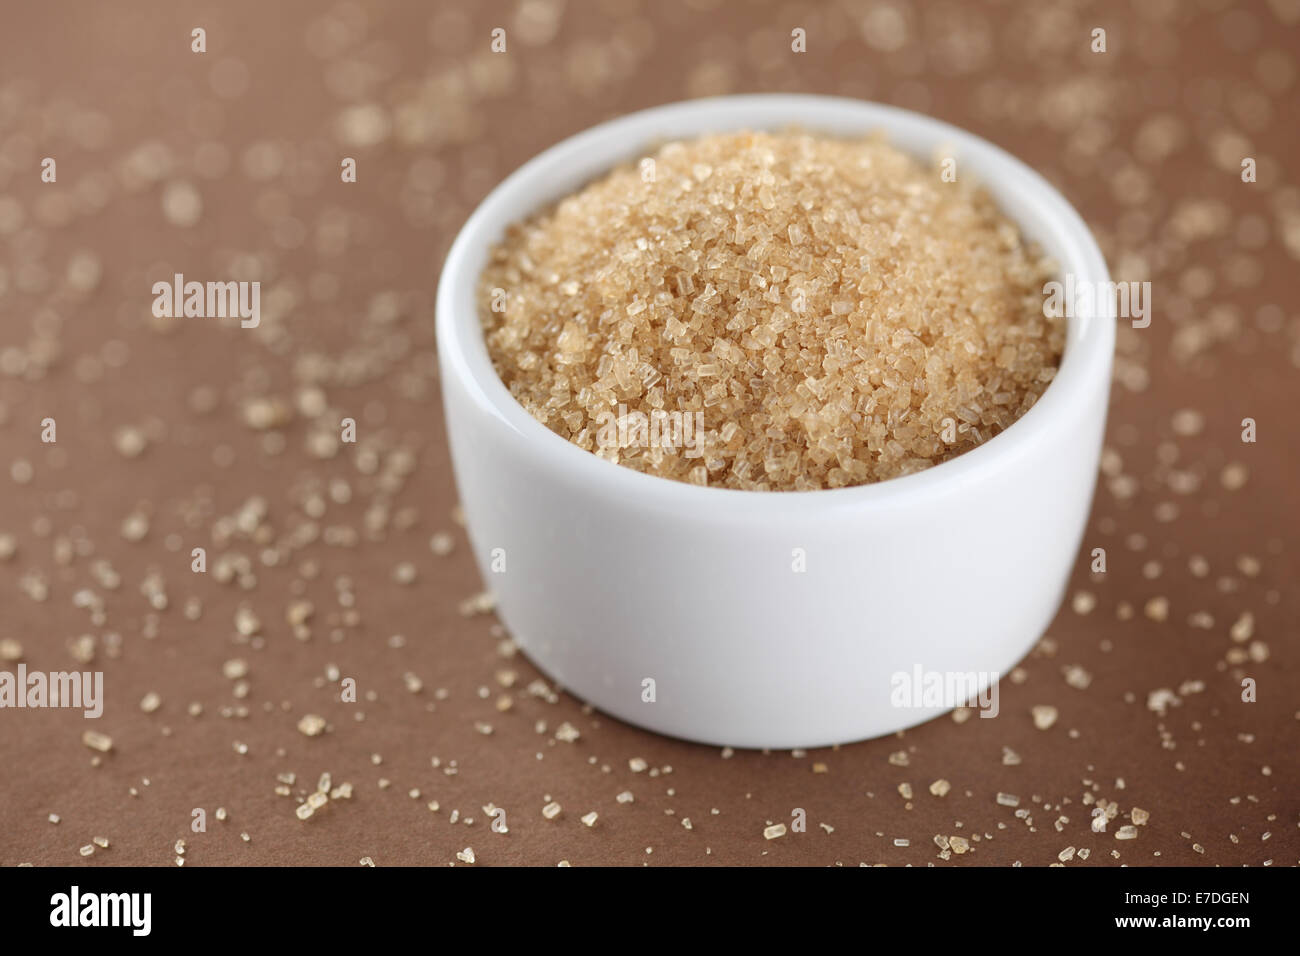 Brown cane sugar in a bowl. Stock Photo